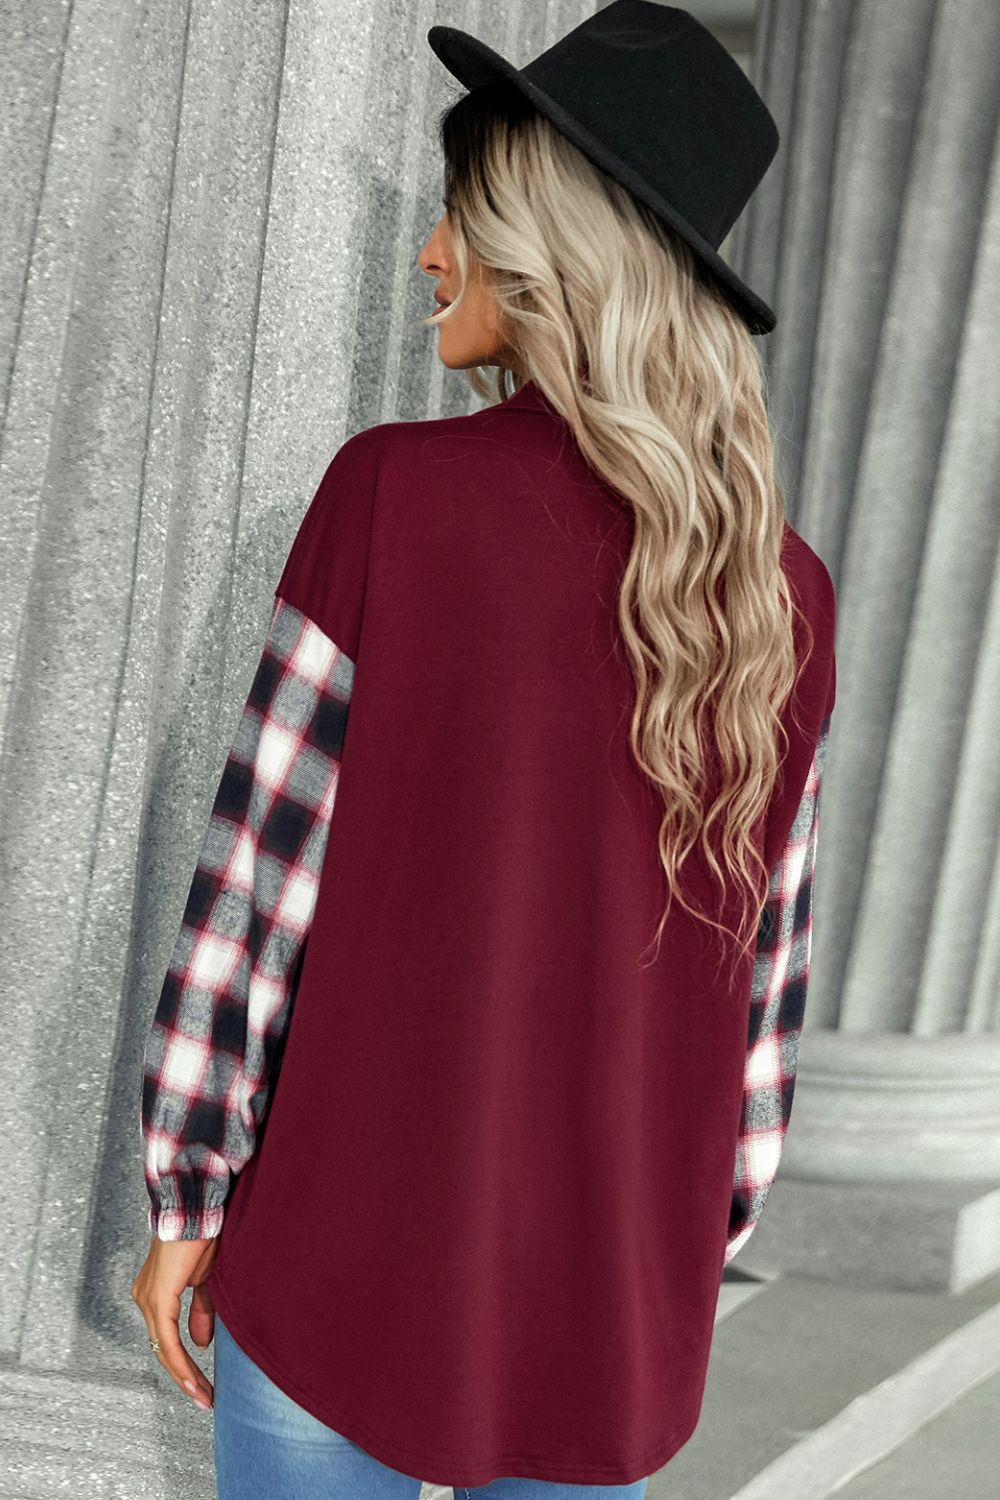 Plaid Dropped Shoulder Shirt with Breast Pocket